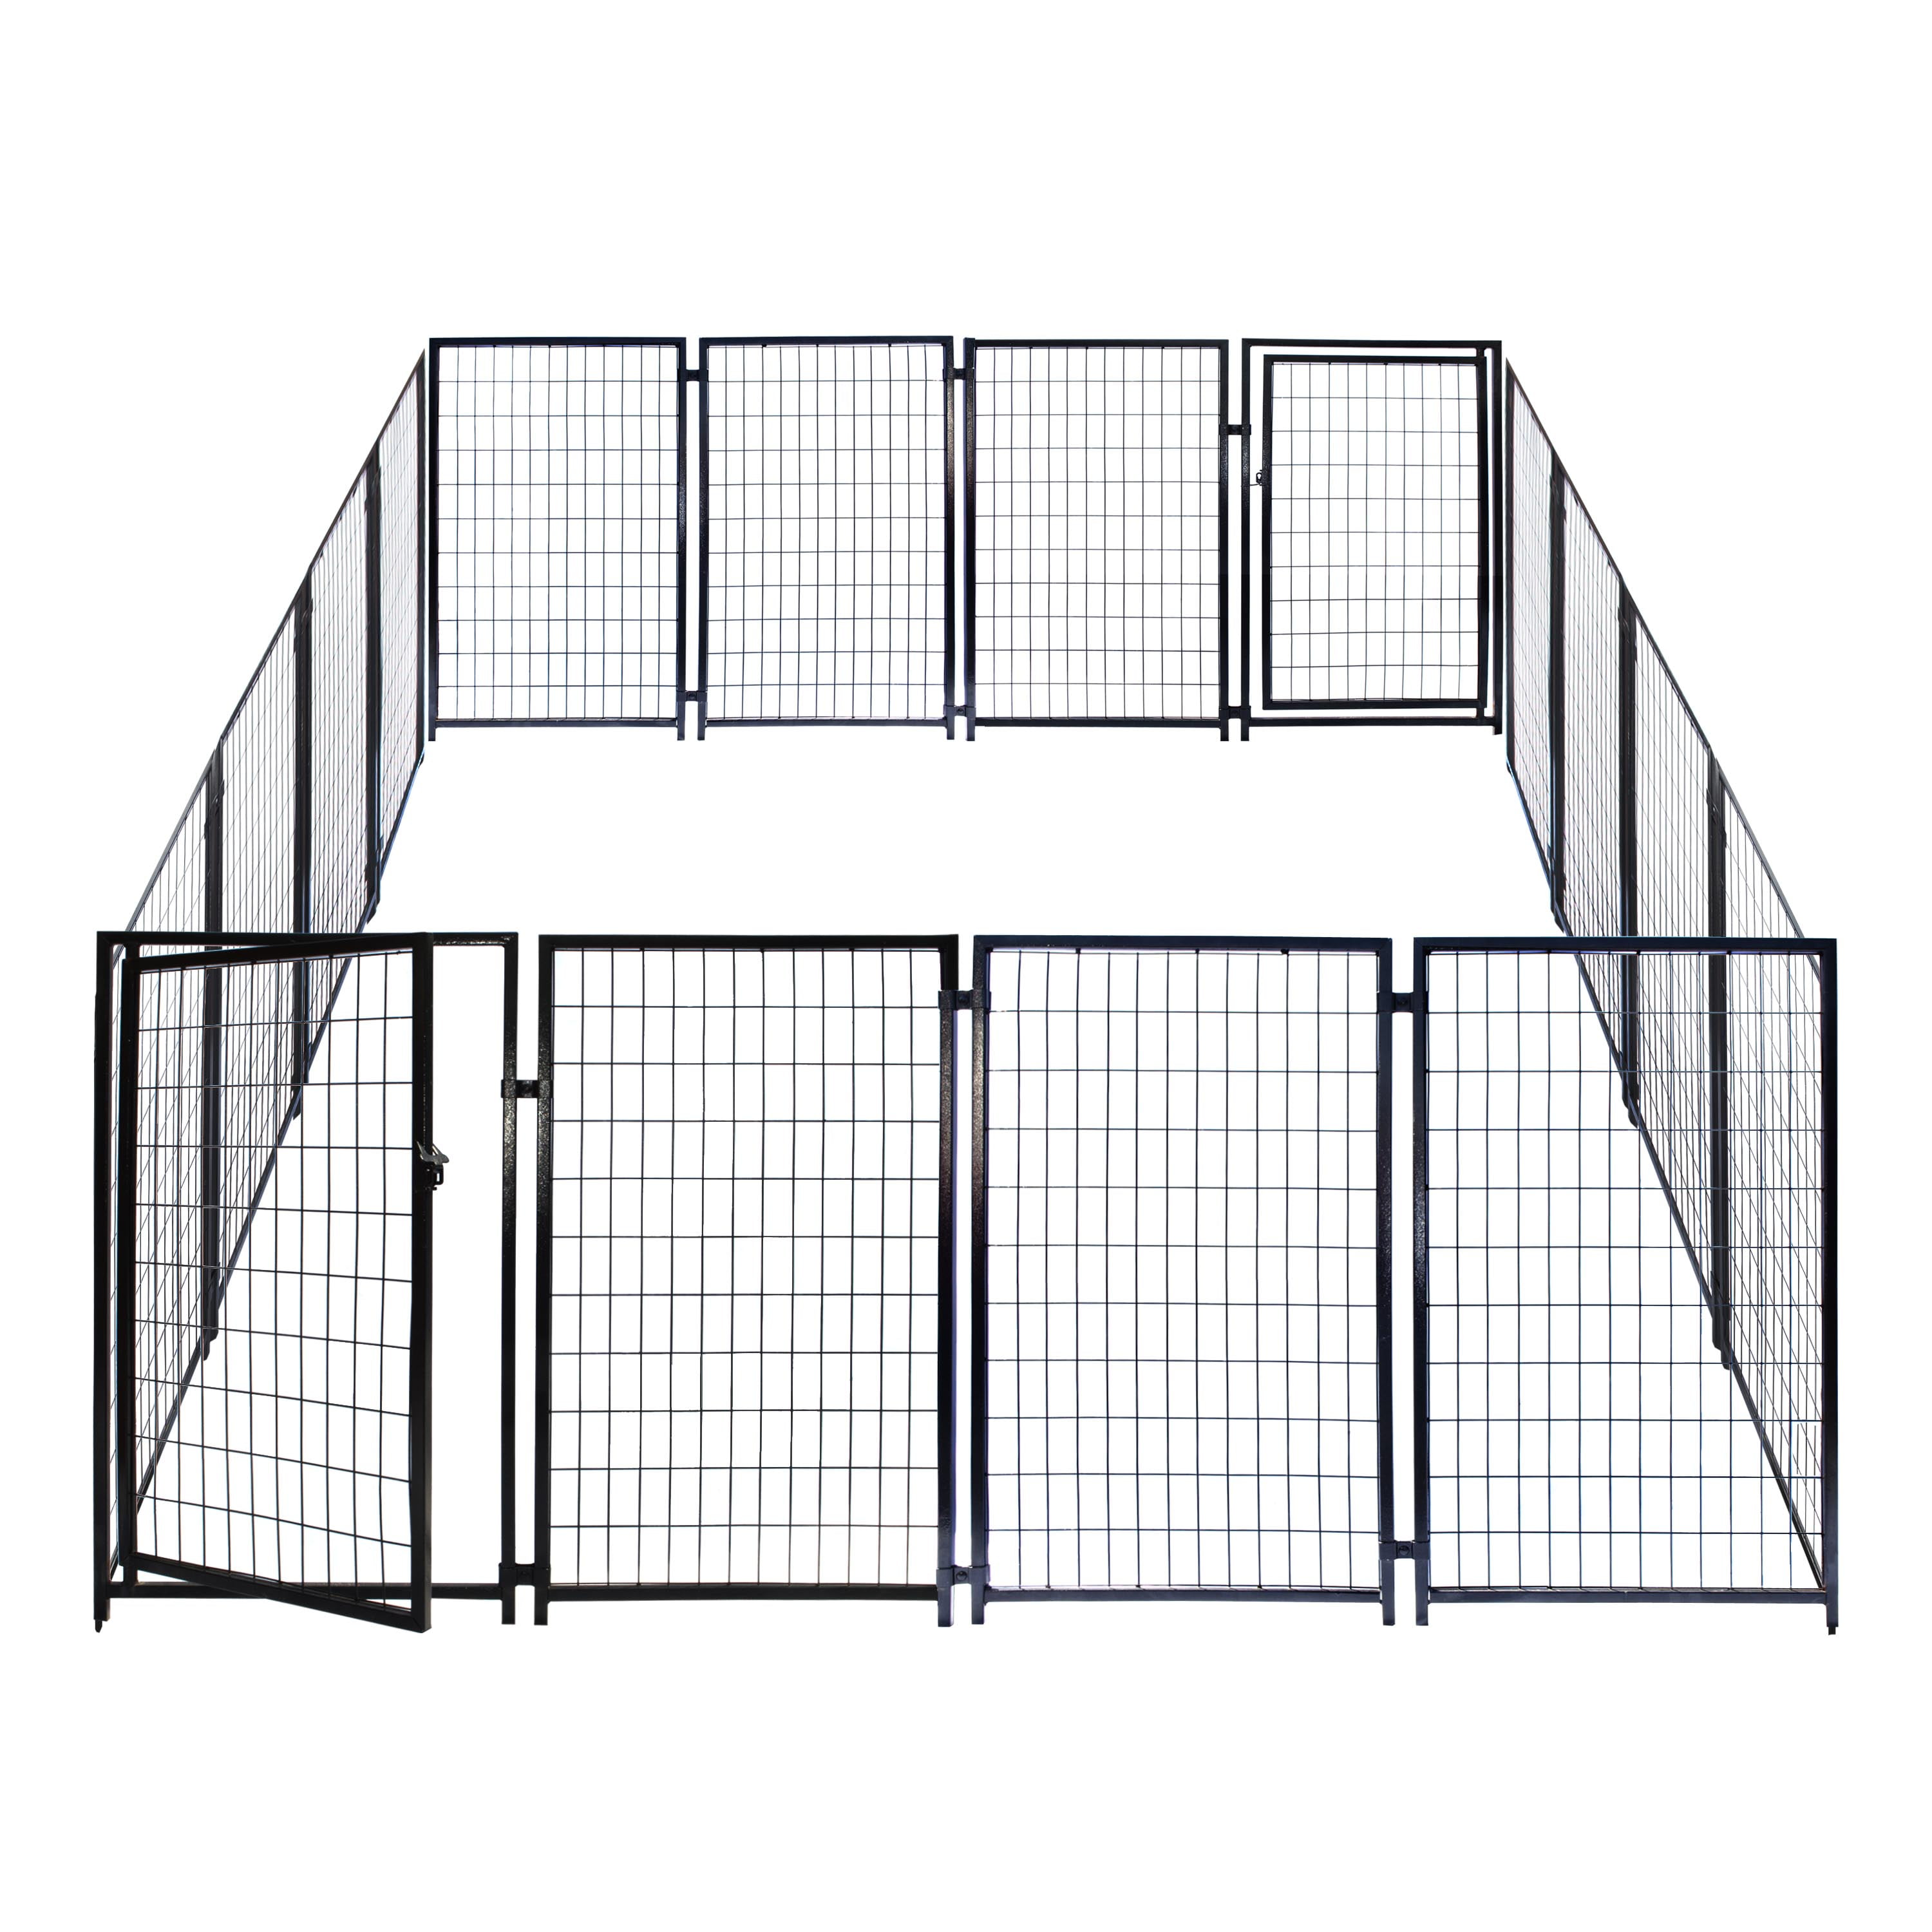 Picture of Aleko 2DK5X5X4SQ-UNB 10 x 10 x 4 Ft. Dog Kennel Heavy Duty Pet Playpen, Dog Exercise Pen Cat Fence Run for Chicken Coop Hens House